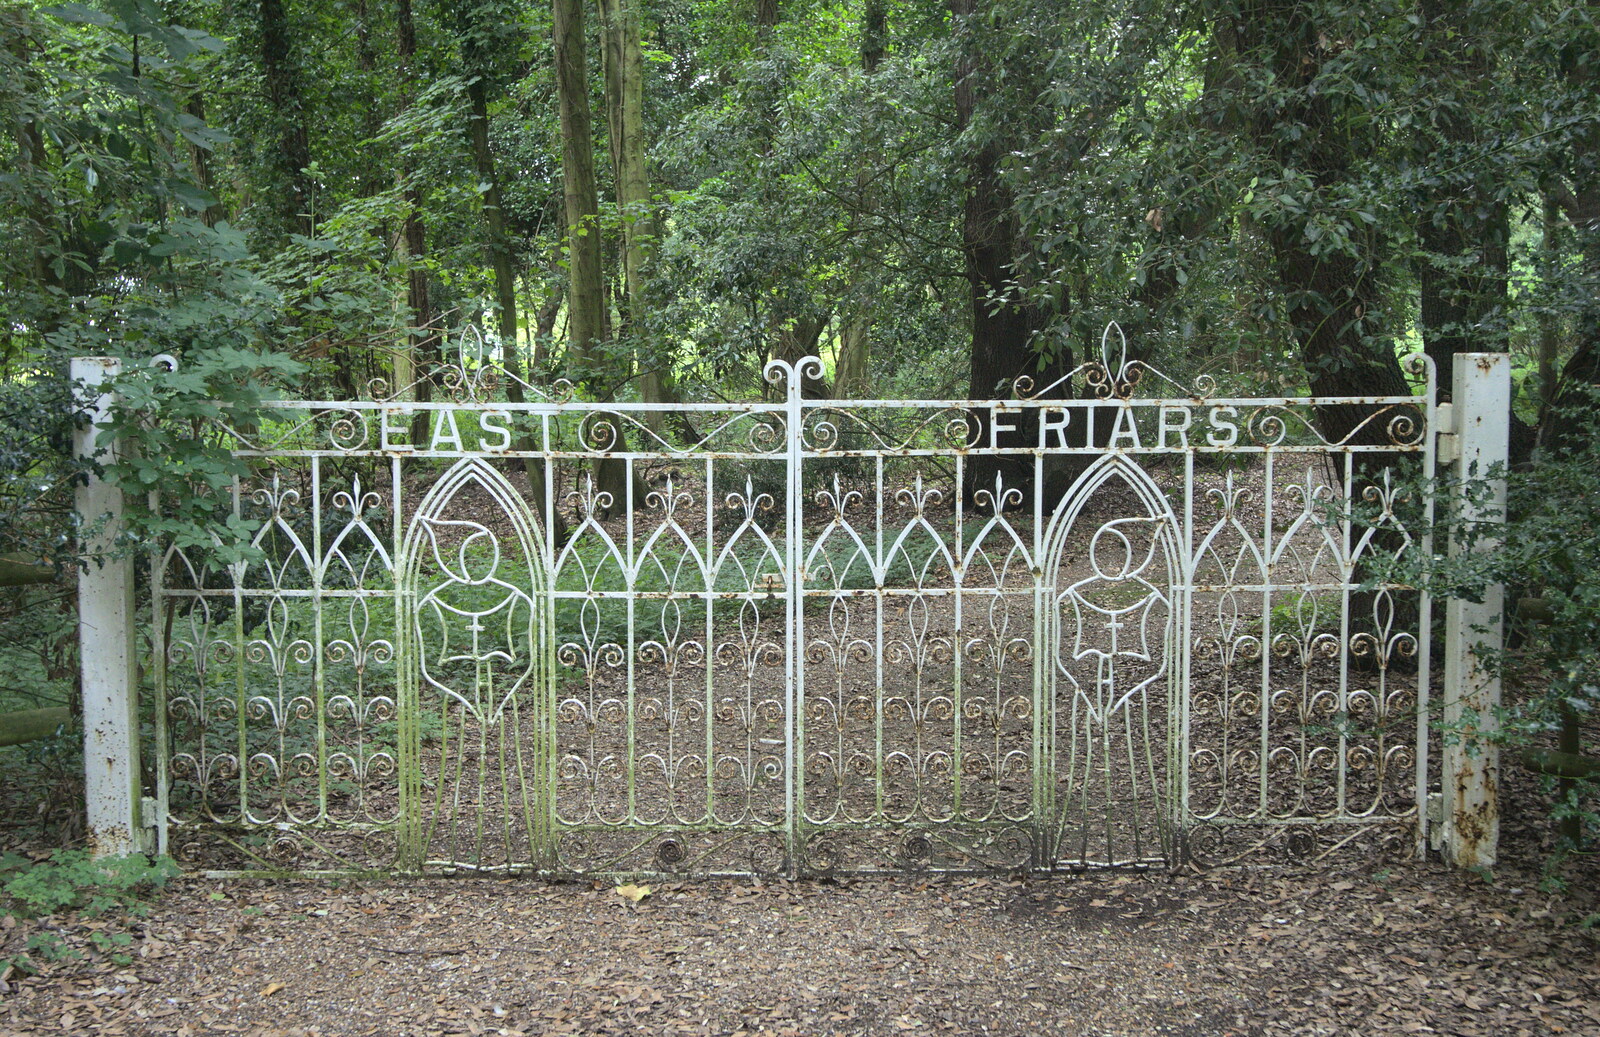 Wrought iron gates marked 'East Friars' from Camping by the Seaside, Cliff House, Dunwich, Suffolk - 15th August 2012